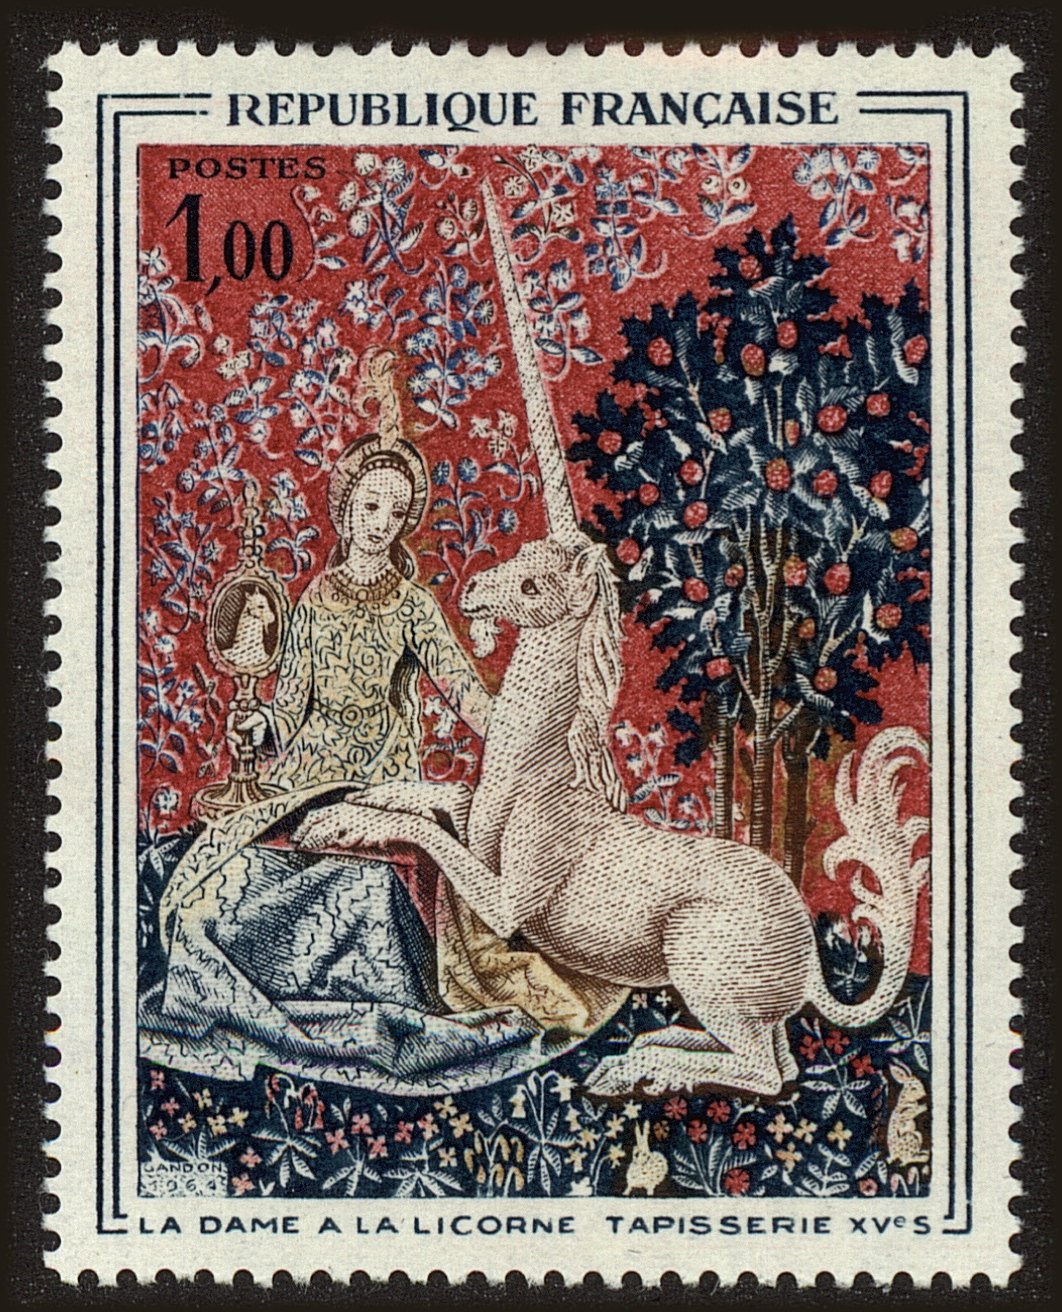 Front view of France 1107 collectors stamp